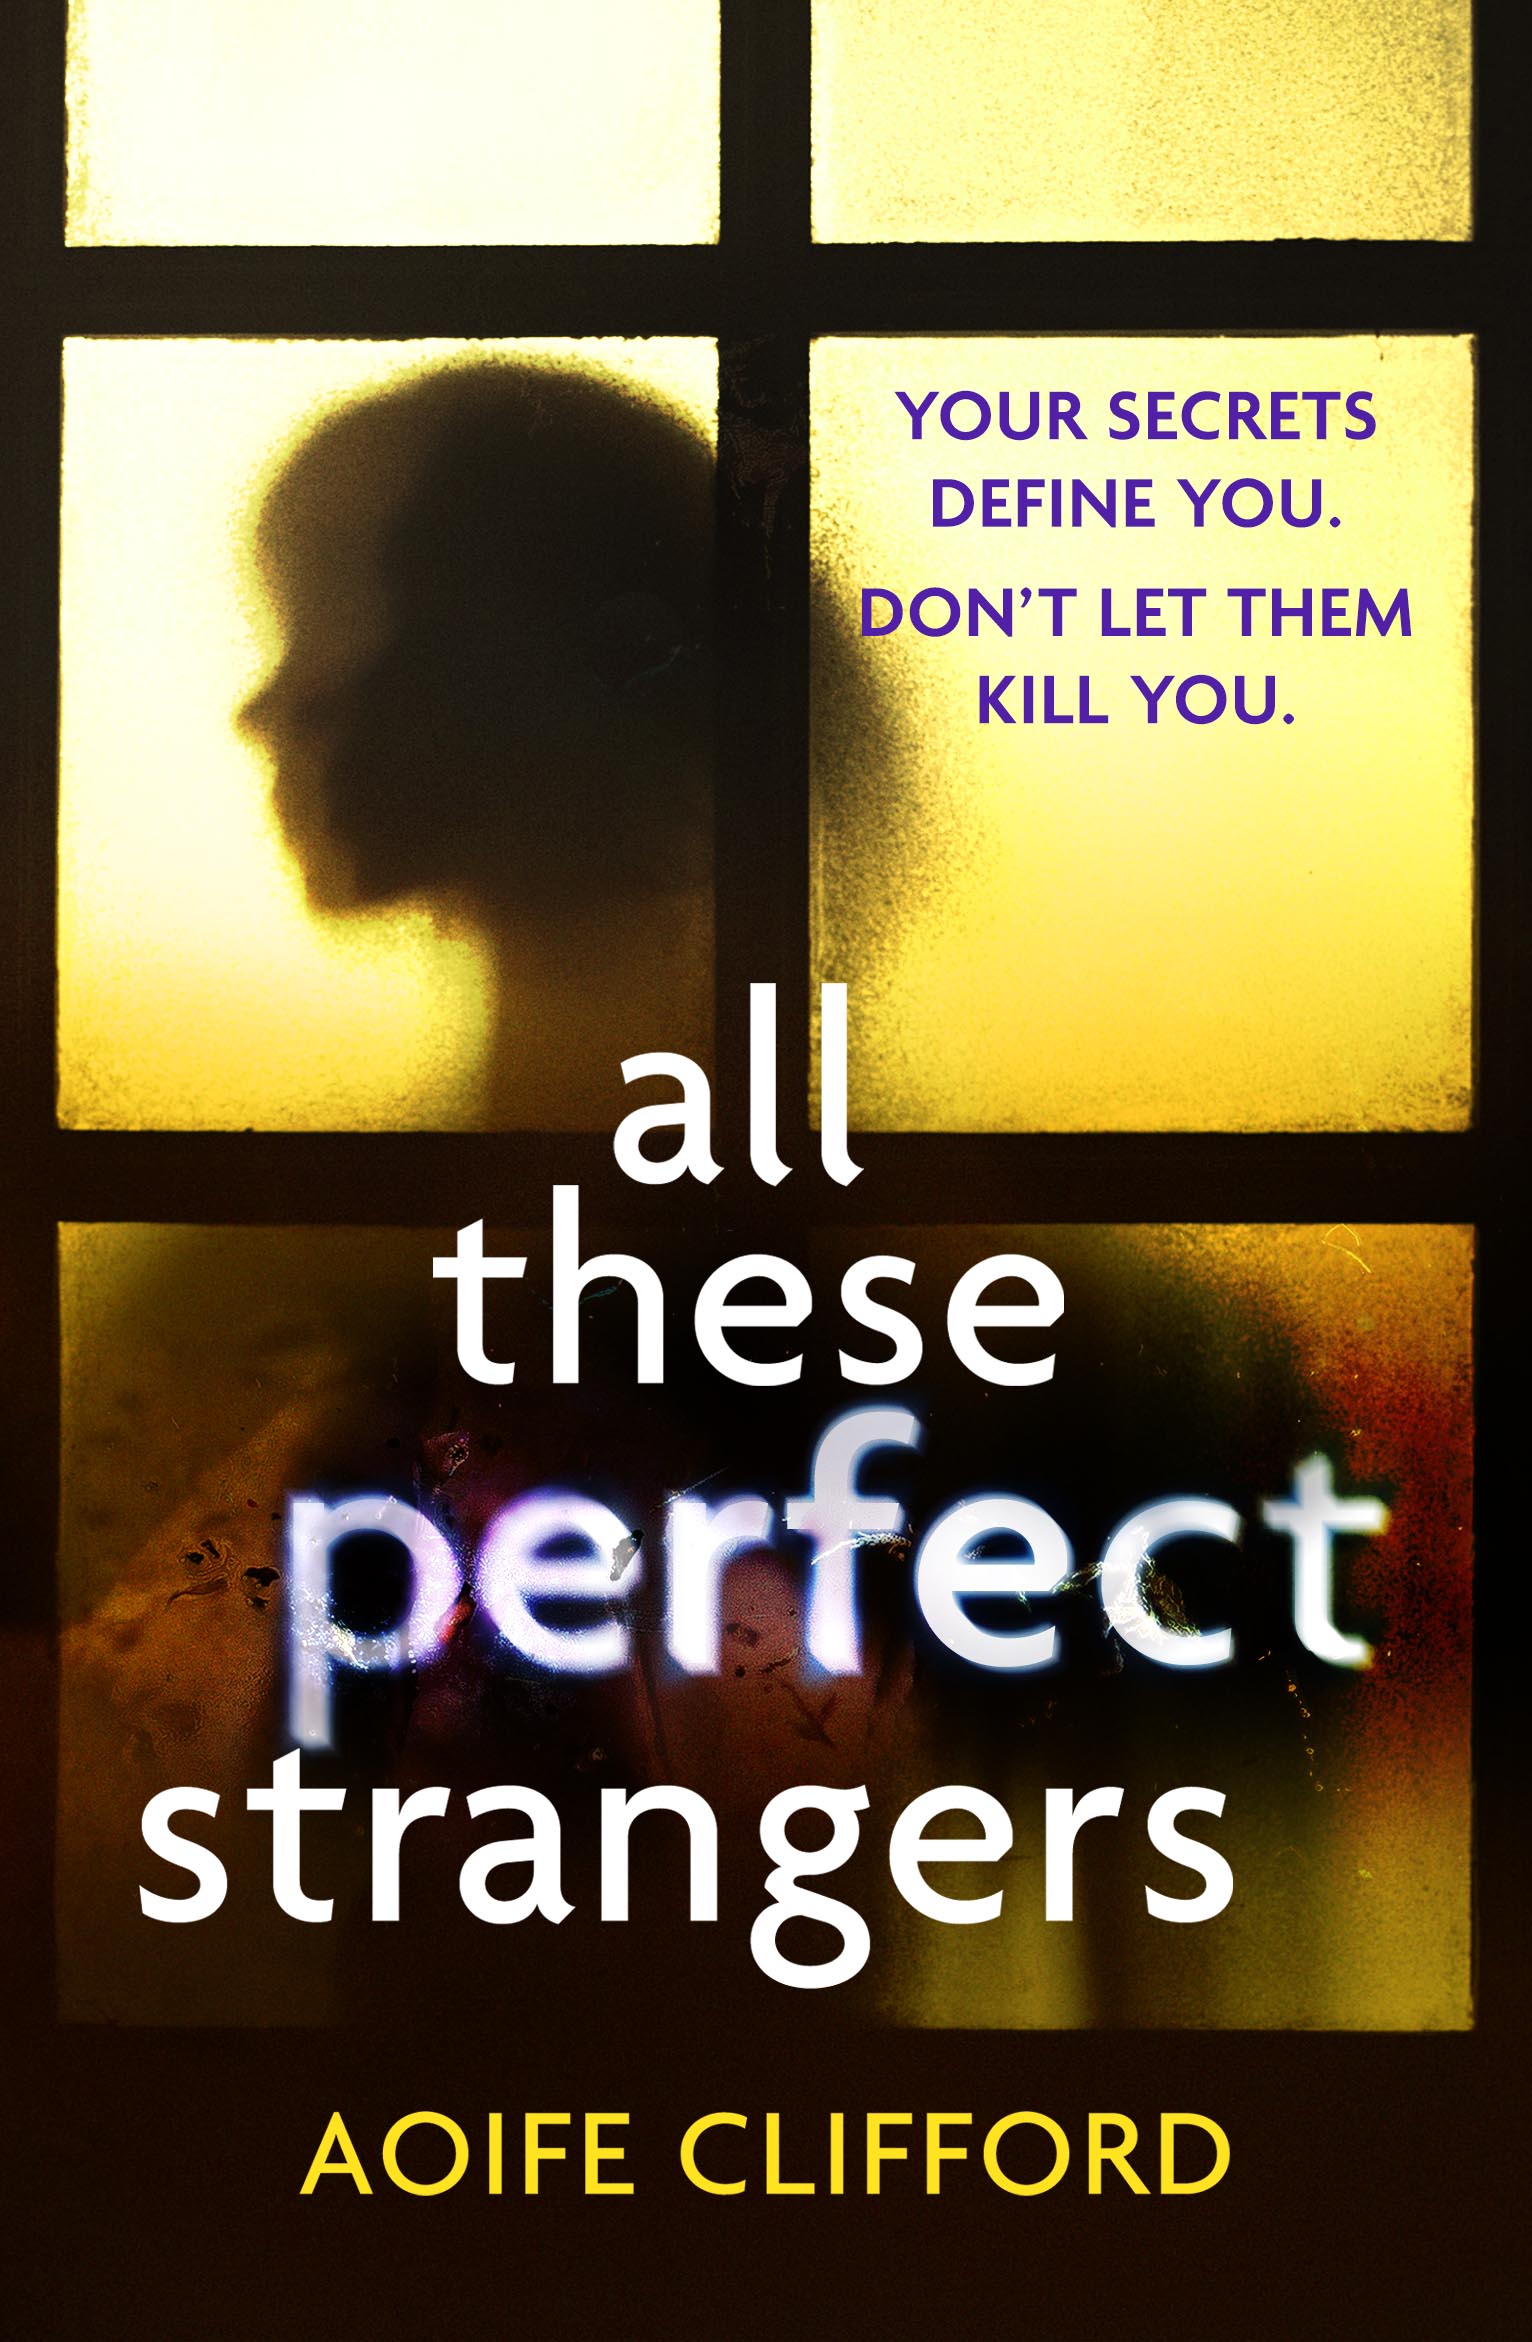 All these perfect strangers revised.jpg